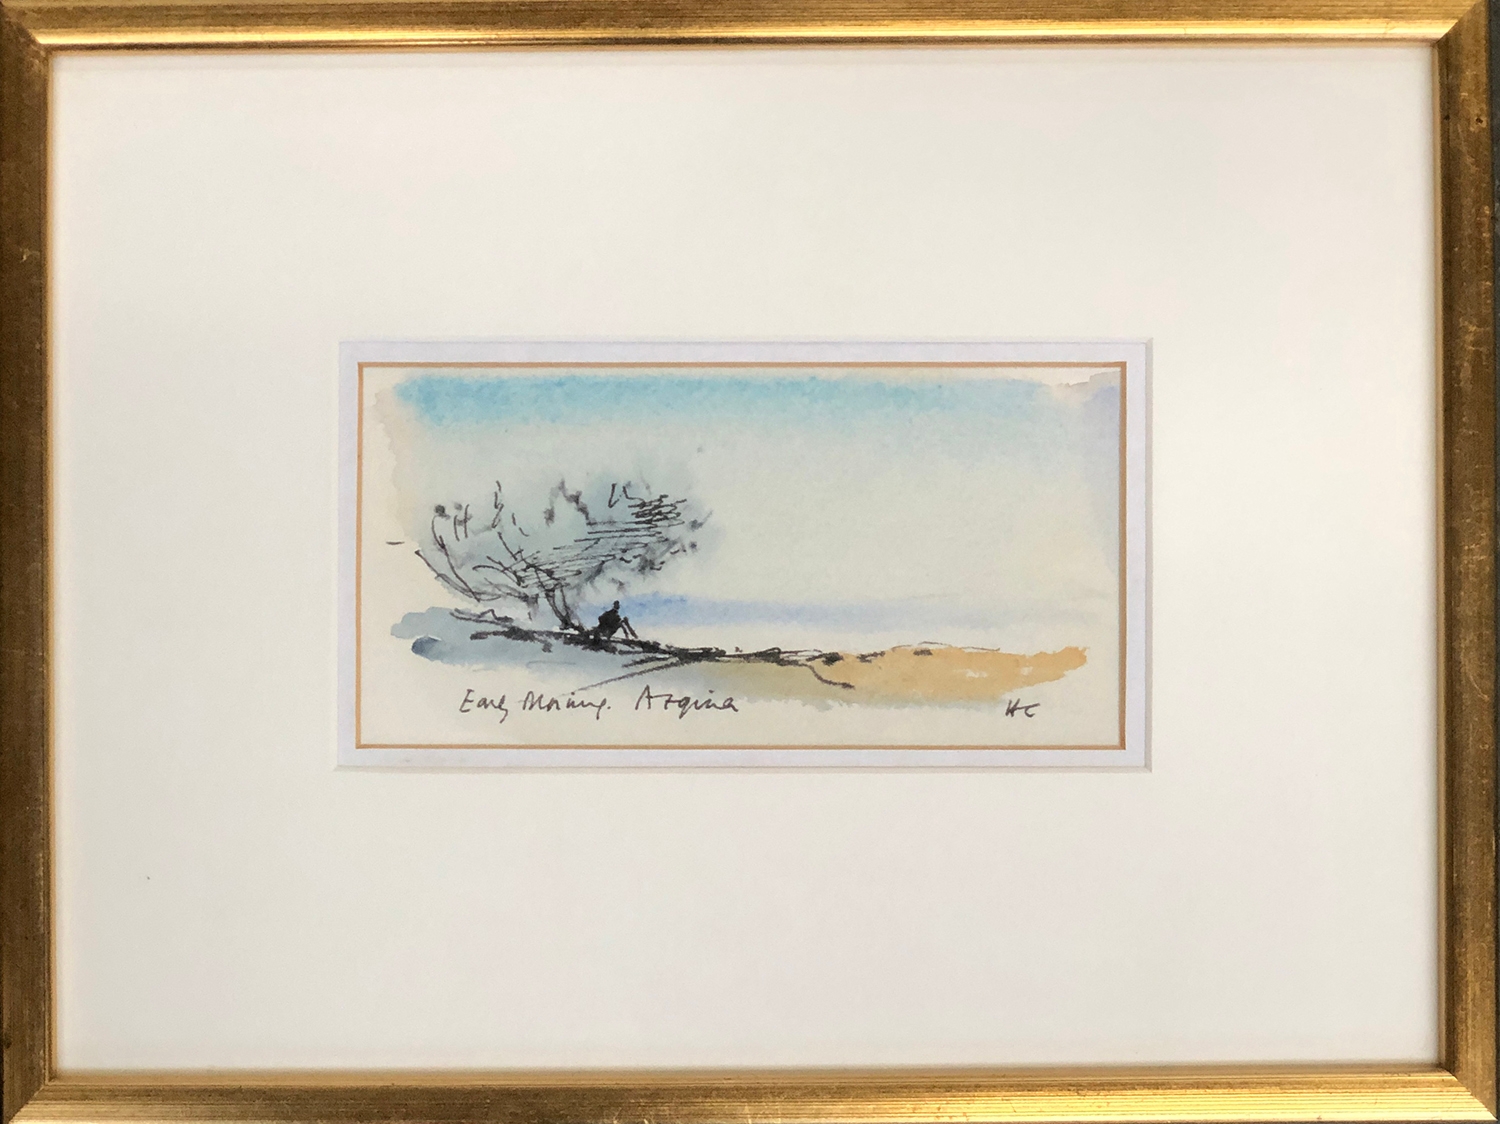 Sir Hugh Casson (1910-1999), 'Early Morning Aegina', watercolour, initialled and titled, 9x18cm - Image 2 of 2